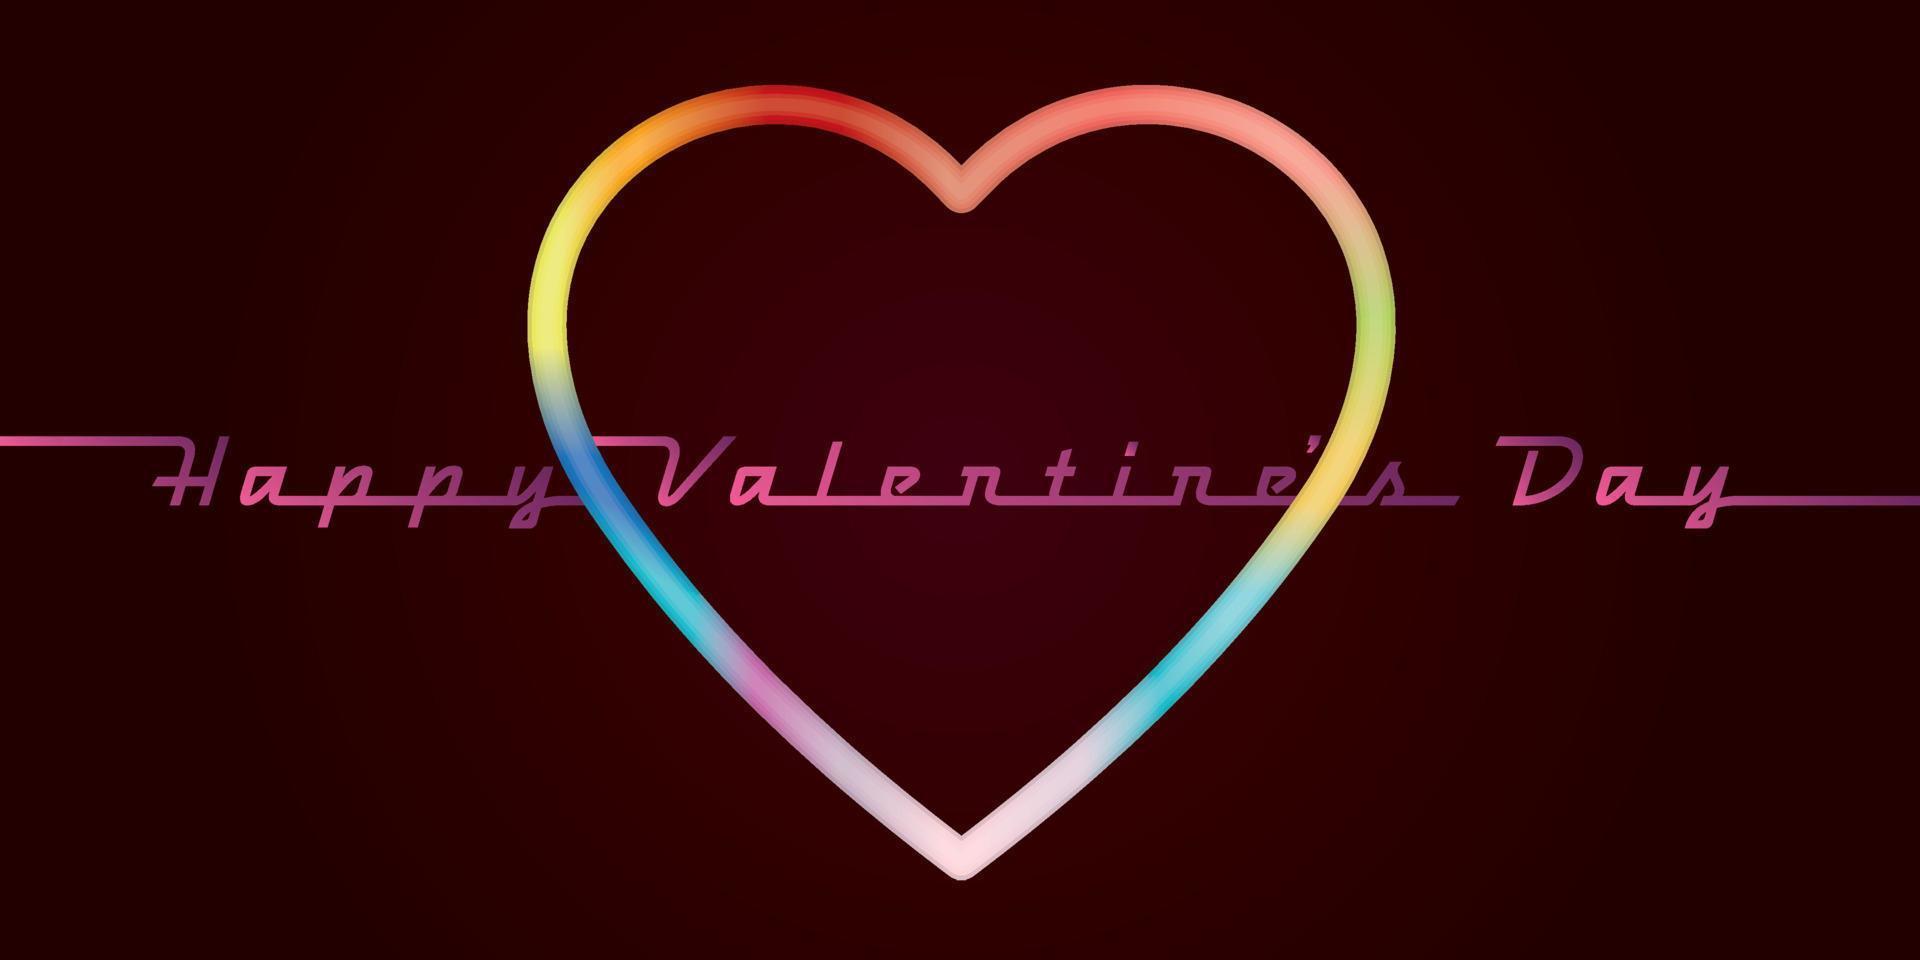 Happy Valentine's Day calligraphy with rainbows heart frame on dark background. vector